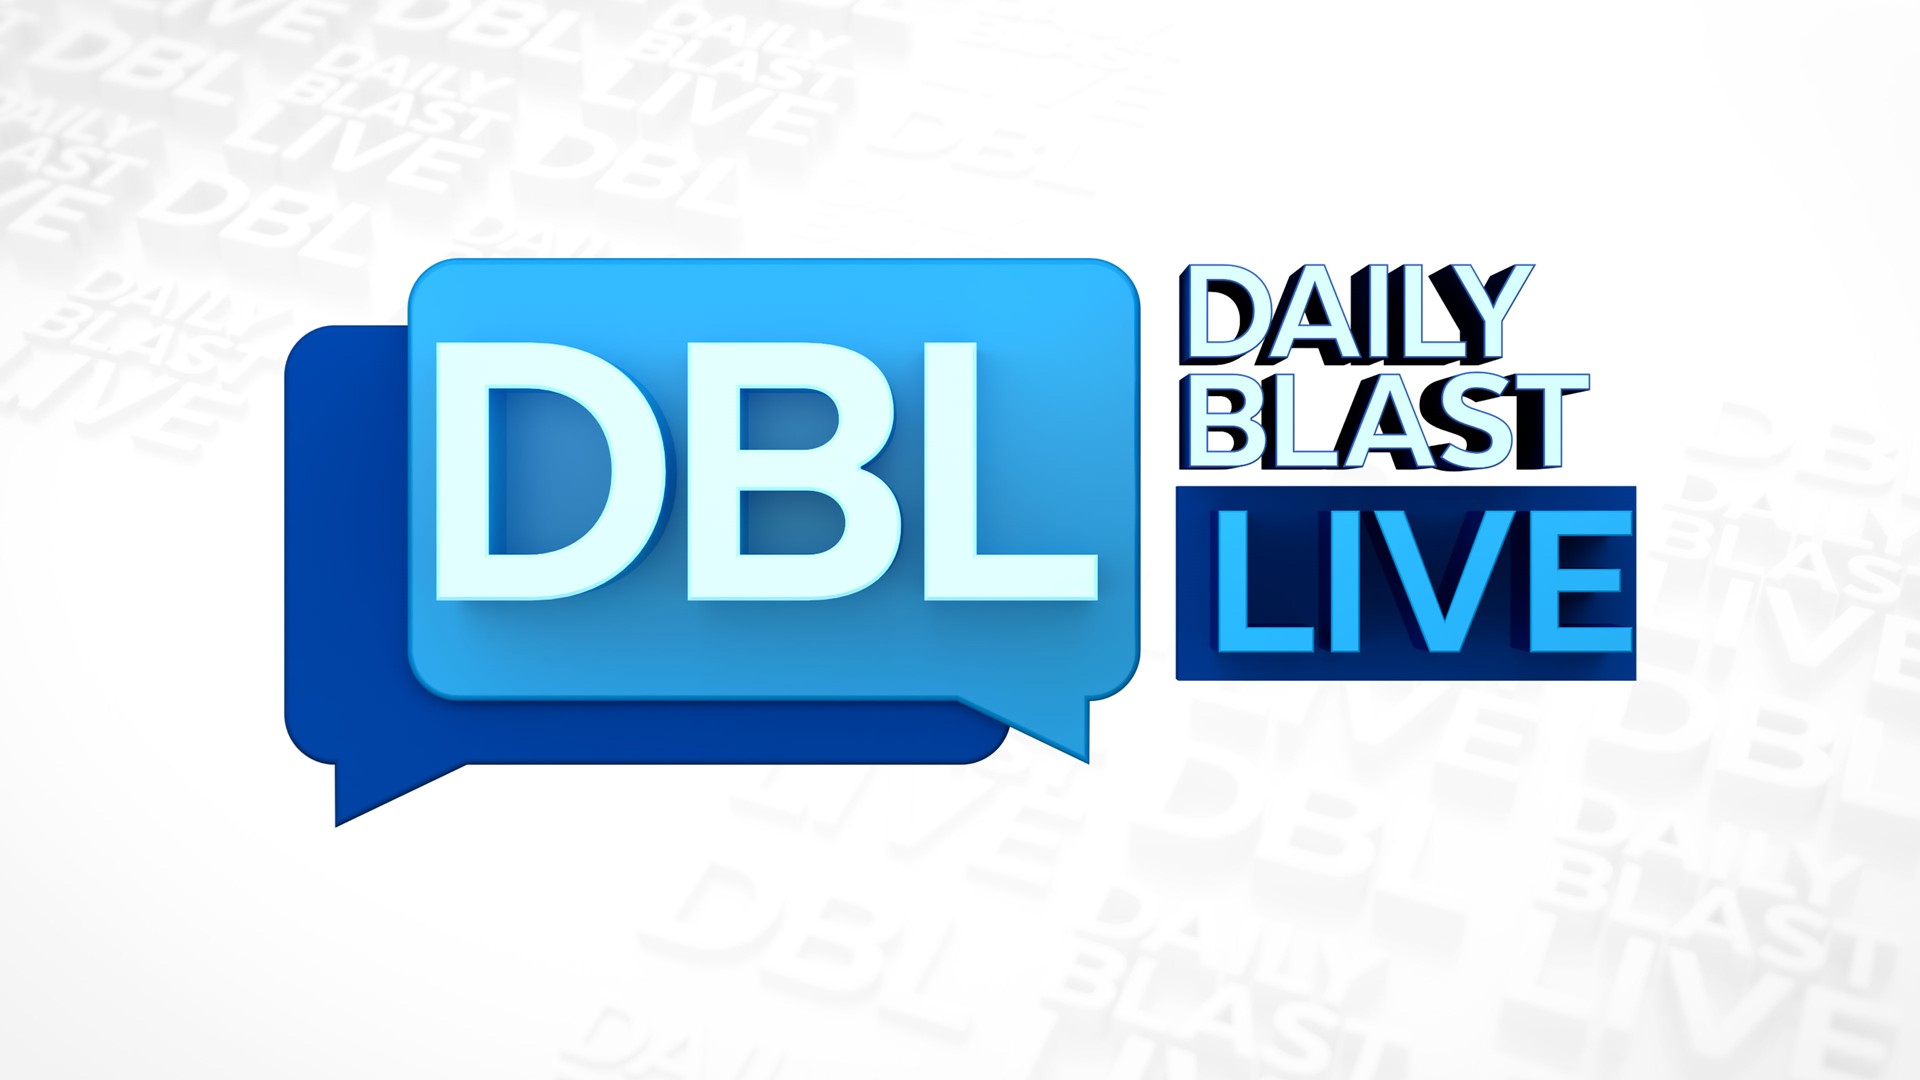 Daily Blast Live brings you the latest trending stories 24/7 with broadcast and digital teams delivering a fun, entertaining and exciting look at the headlines.